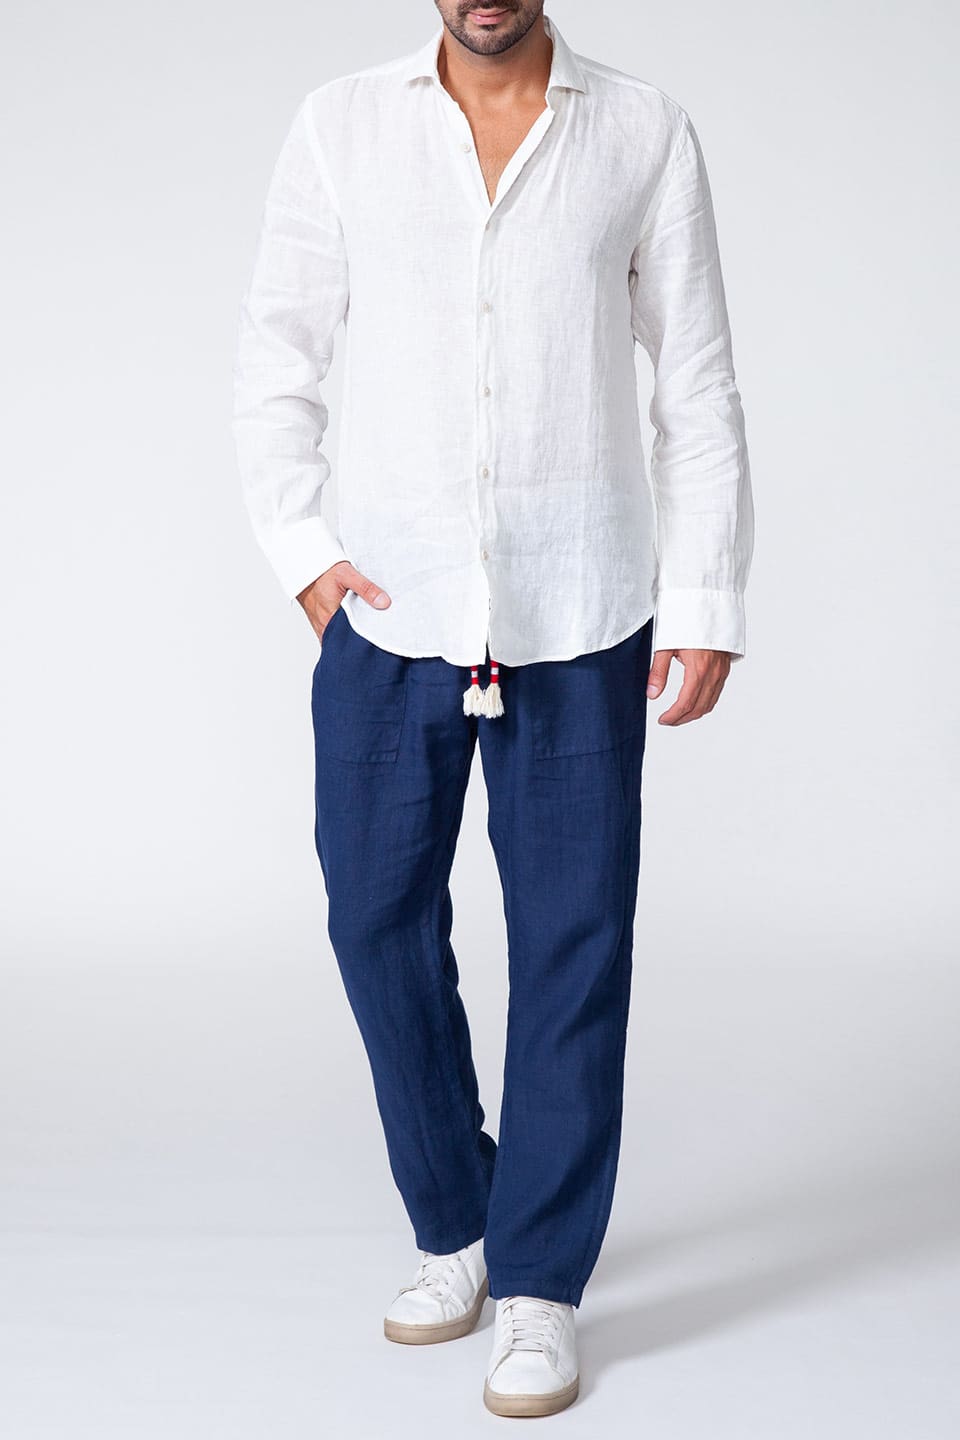 Thumbnail for Product gallery 5, MC saint barth male pamplona shirt white with blue